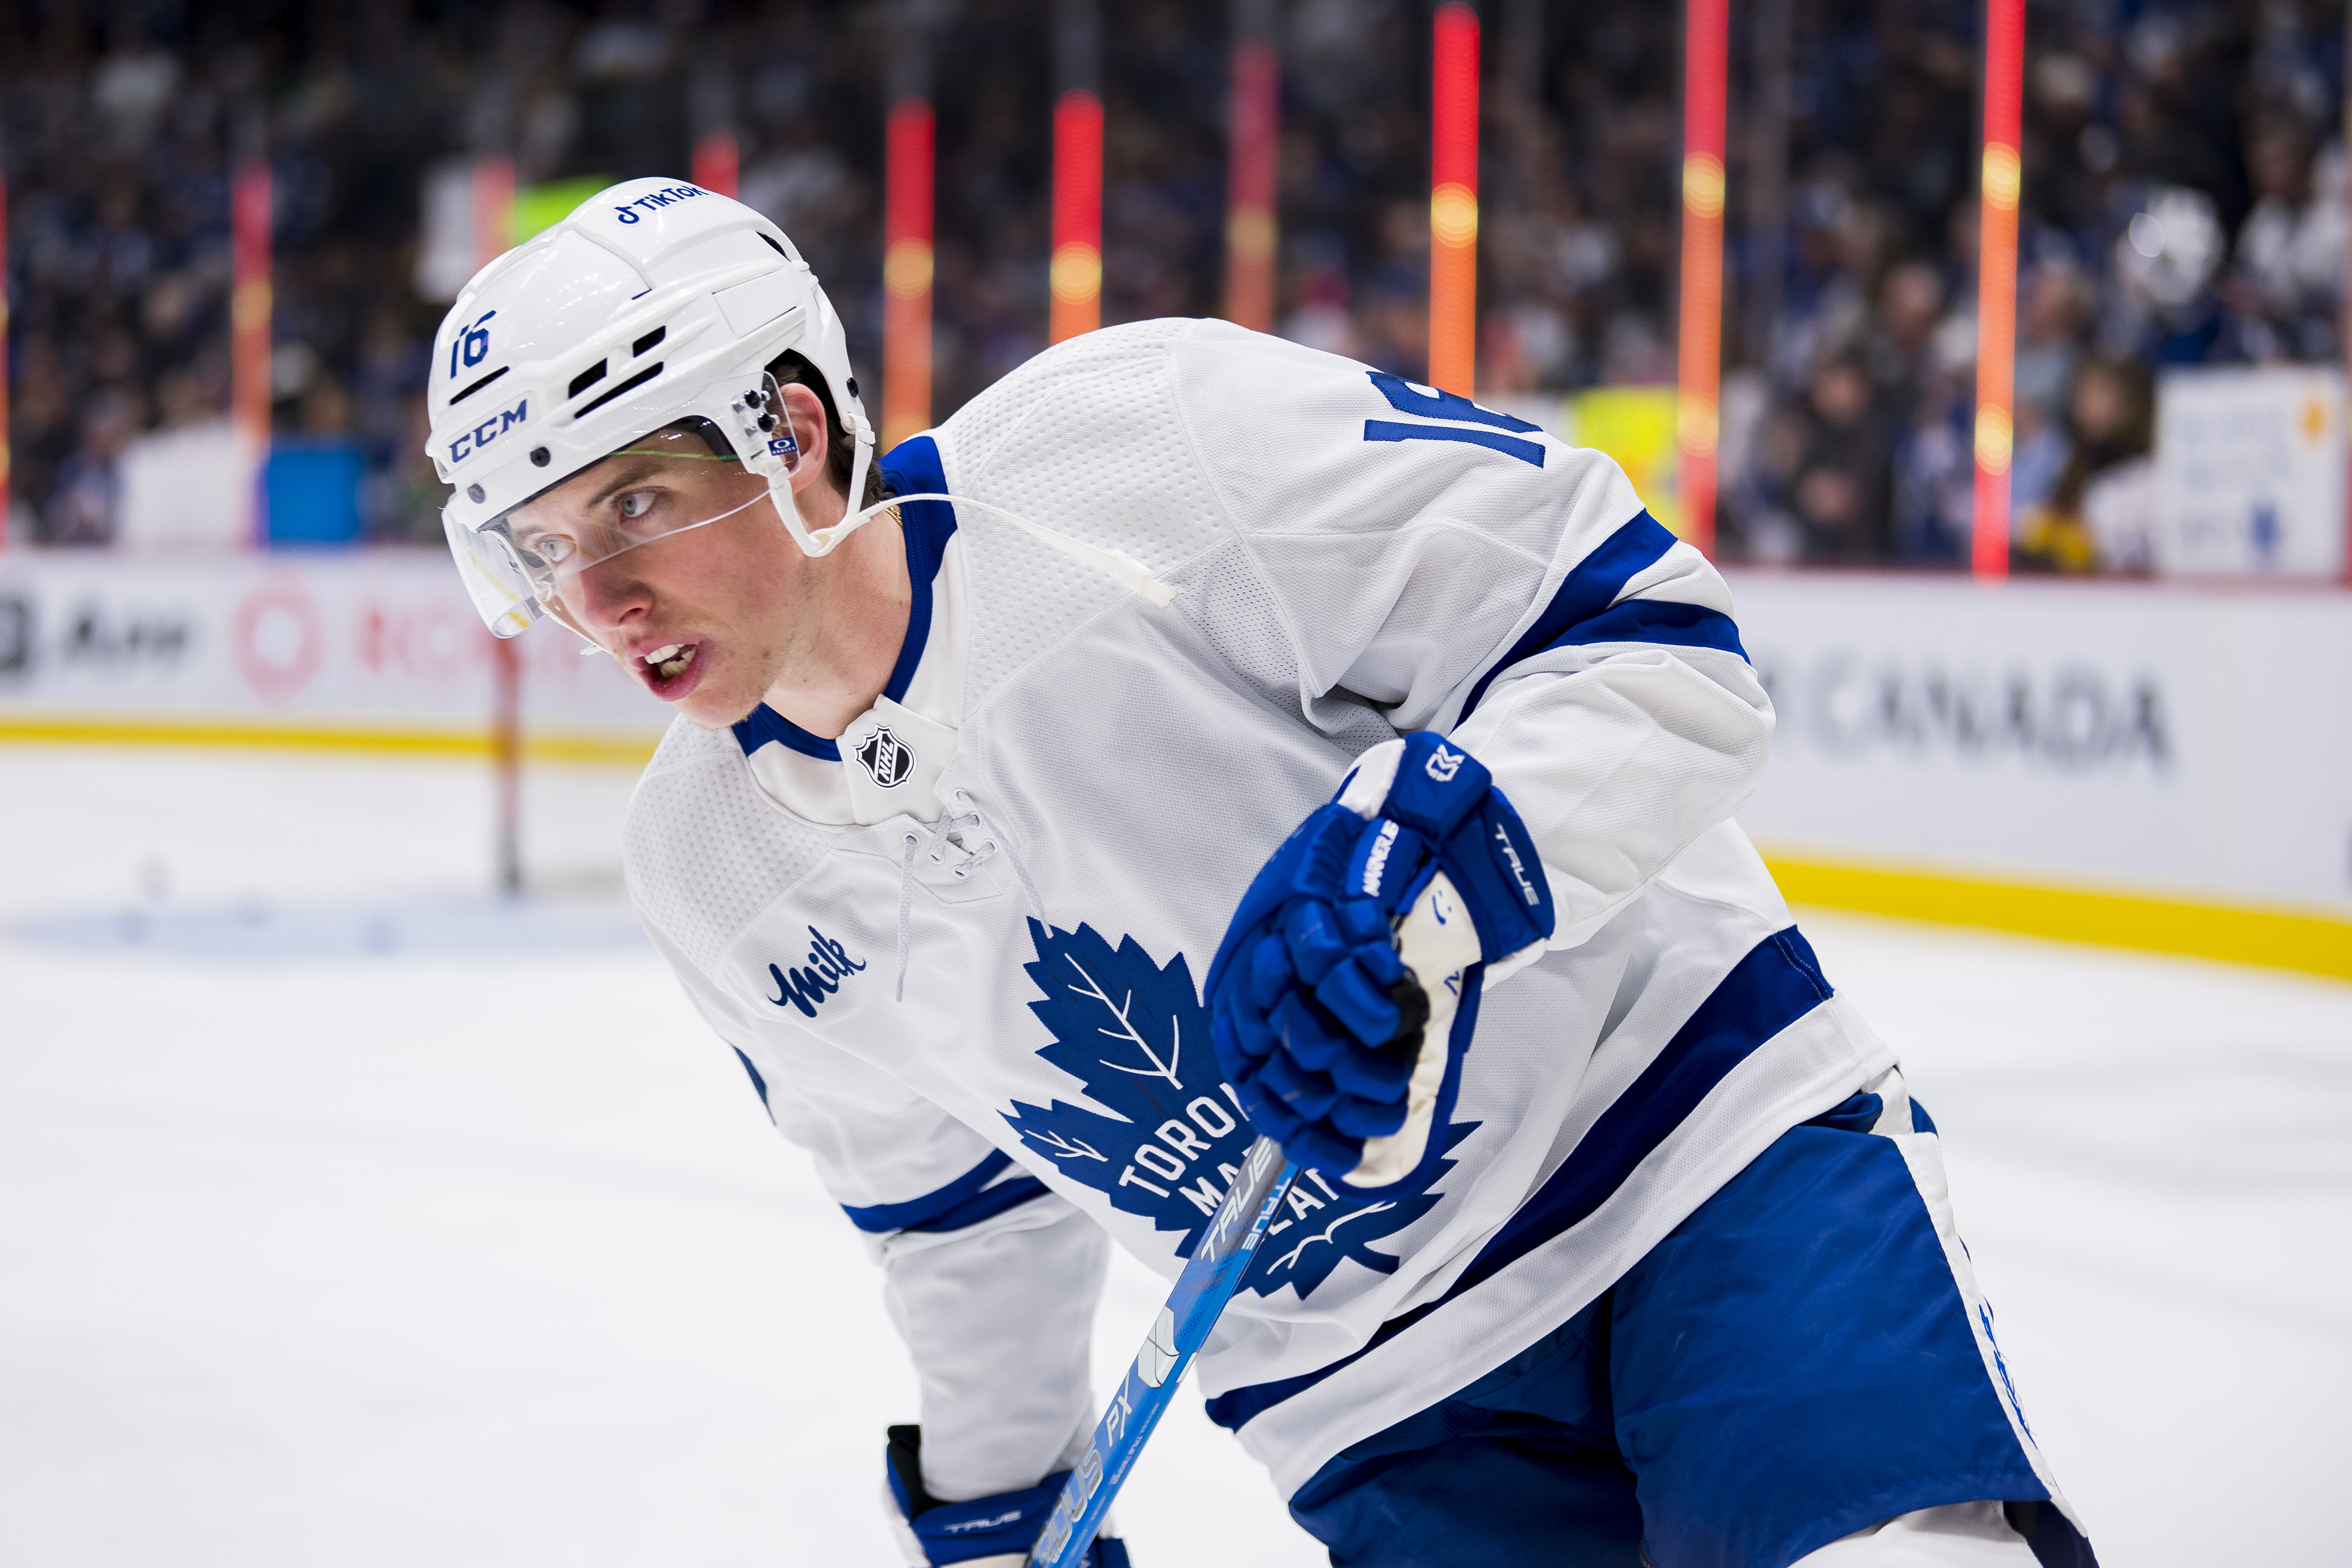 Mitch Marner has tied the Leafs record for longest point streak